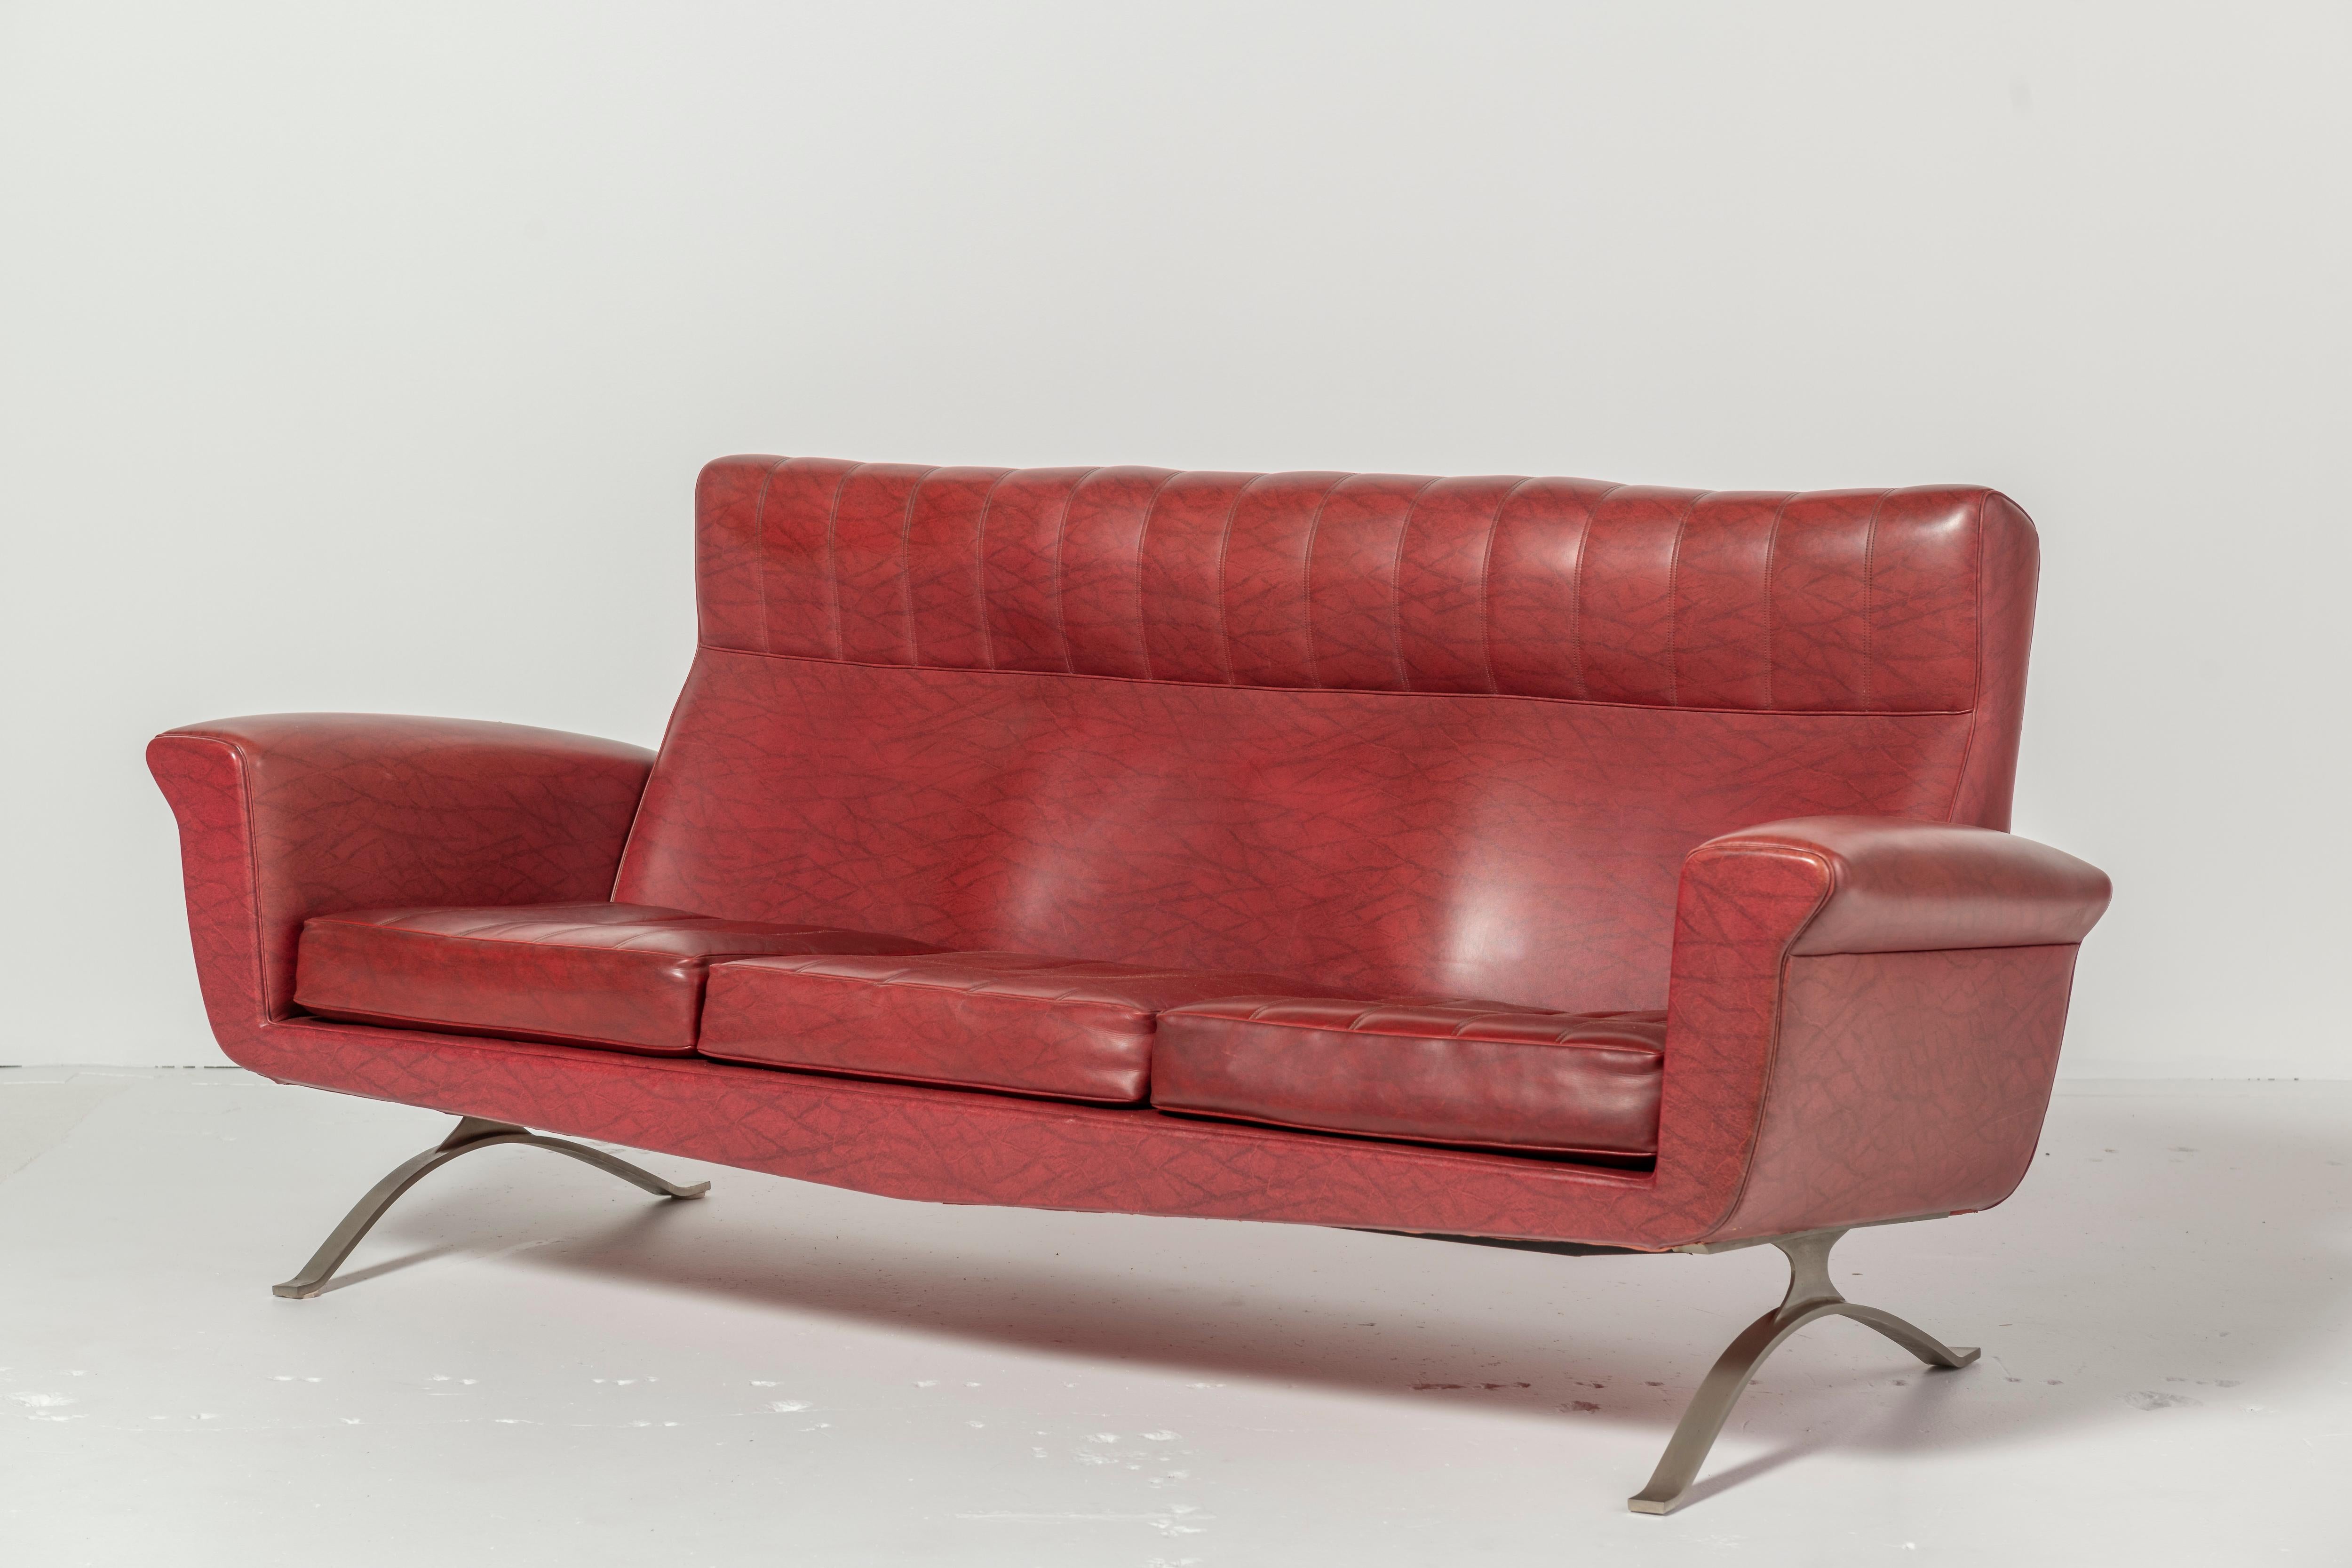 20th Century Red Leather Sofa by Augusto Bozzi for Saporiti, 1950s